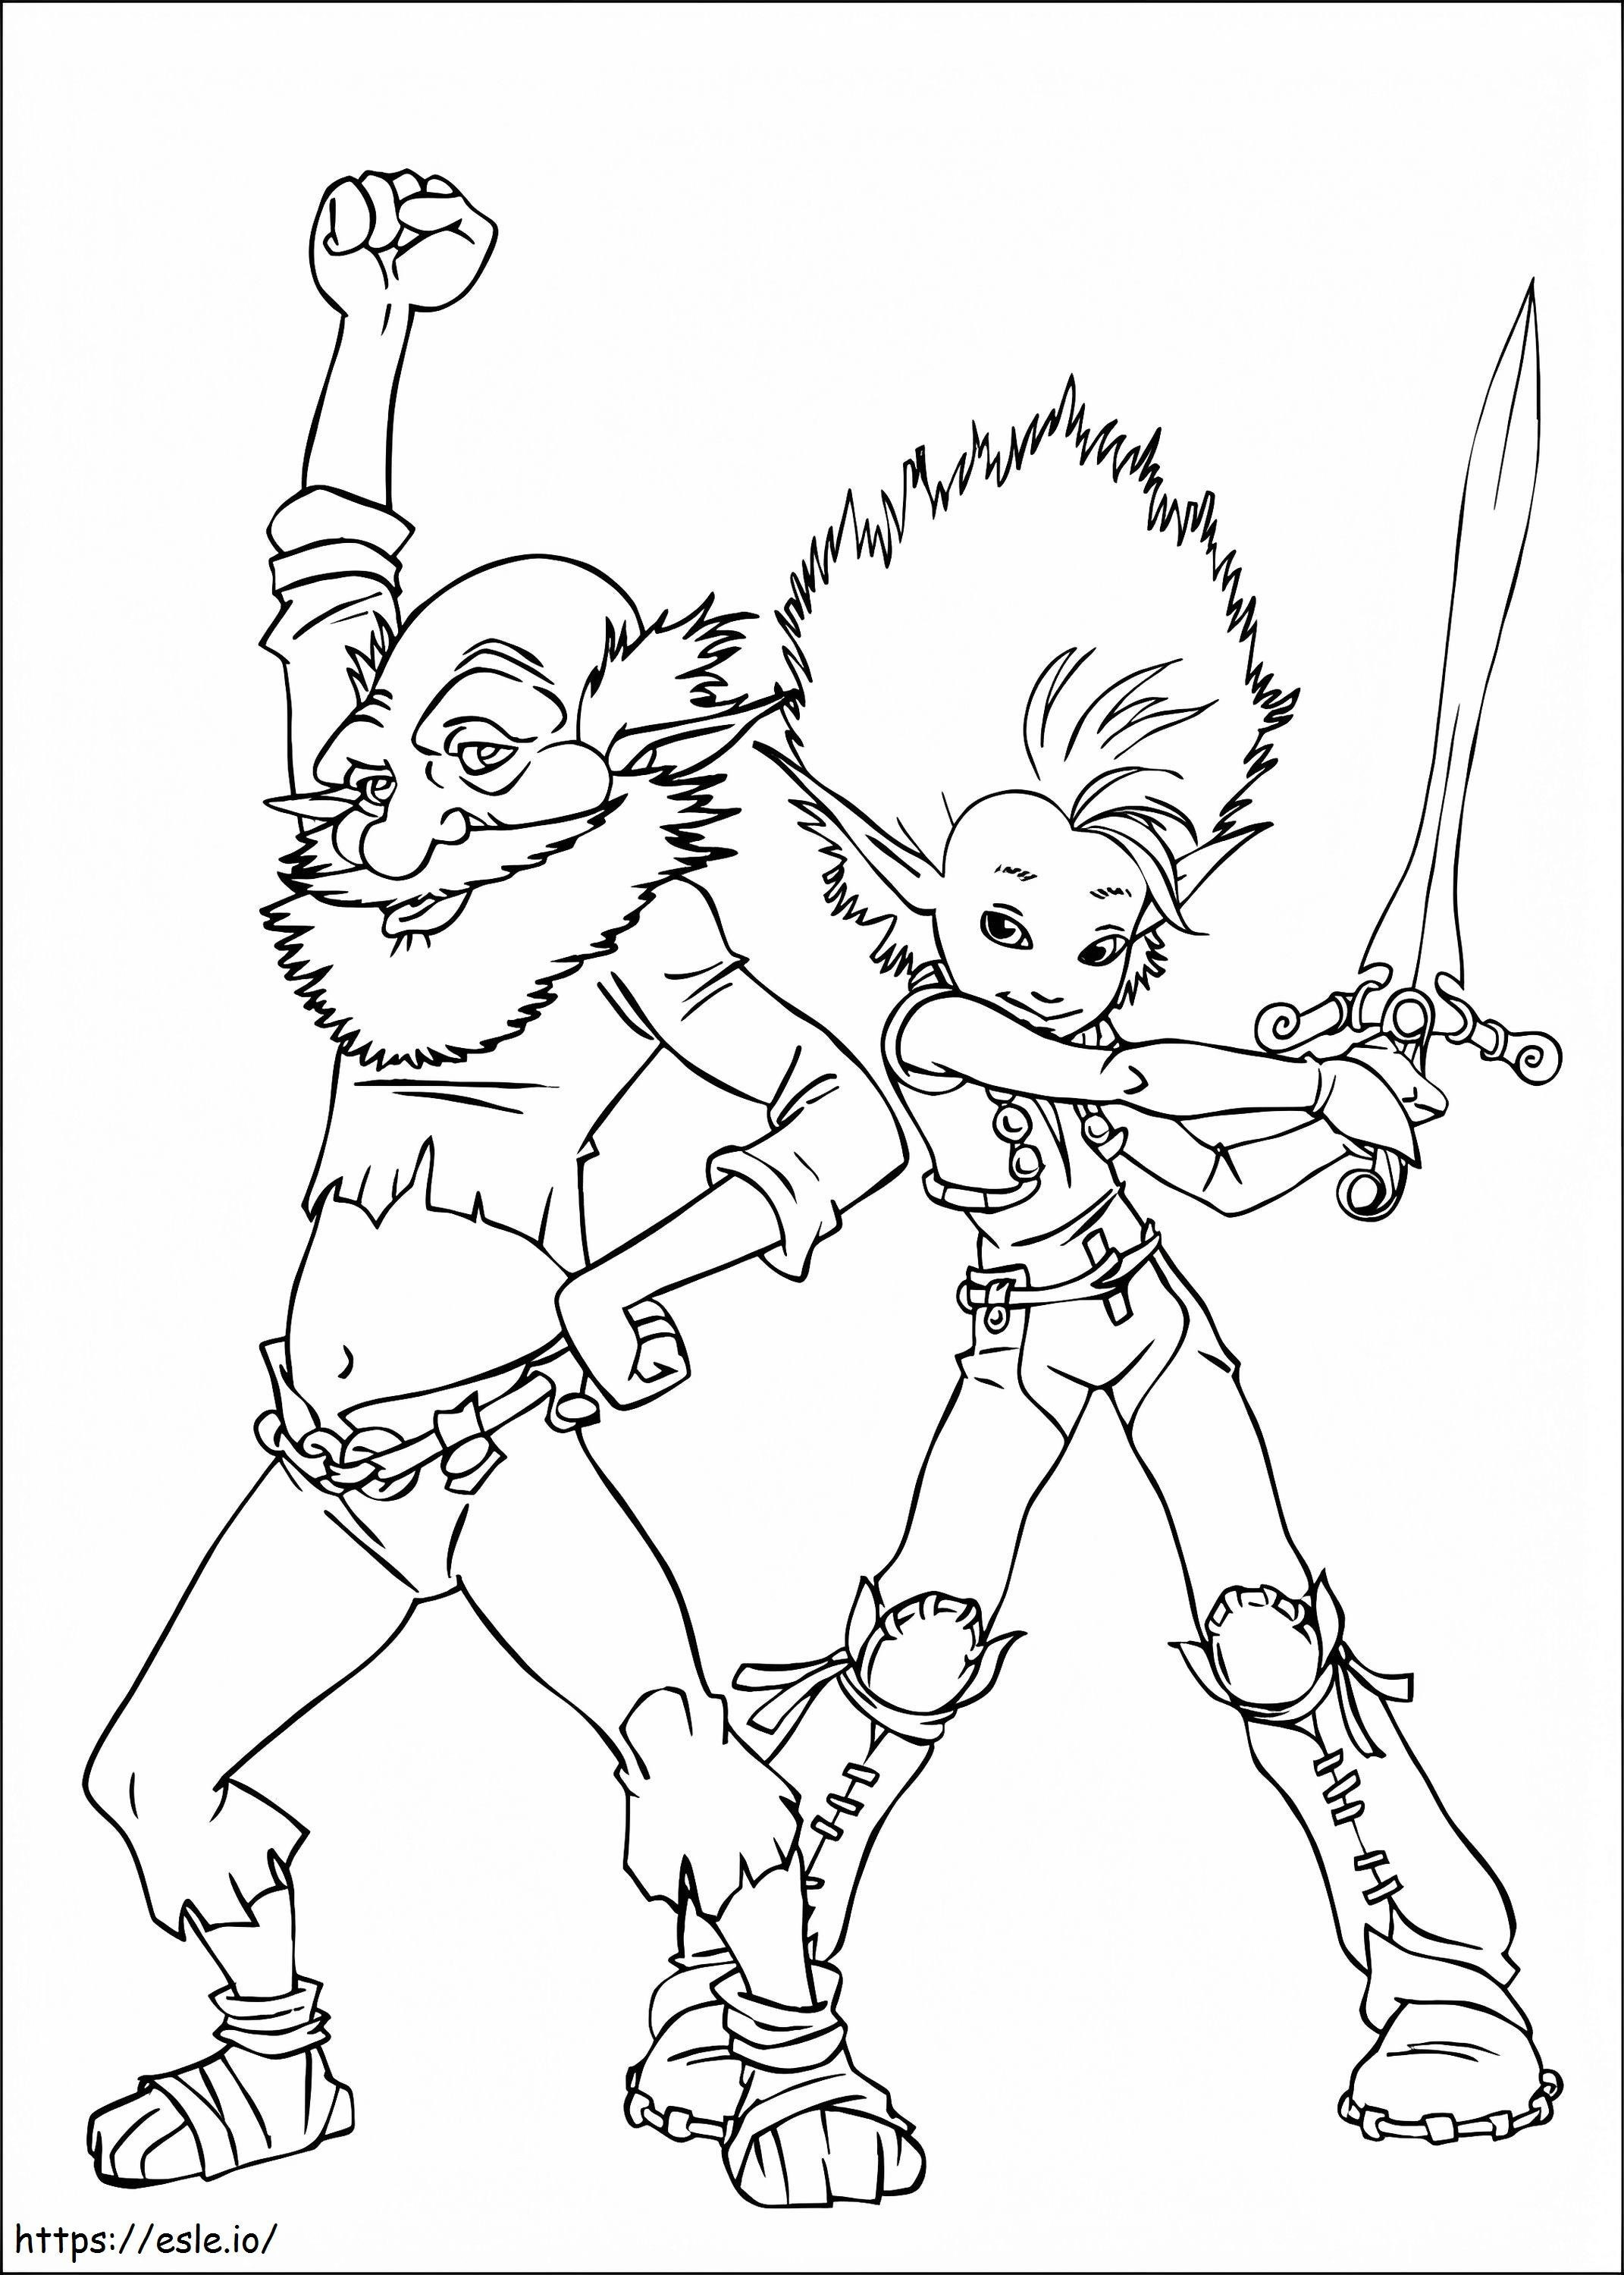 1533521733 Arthur And Archibald A4 coloring page